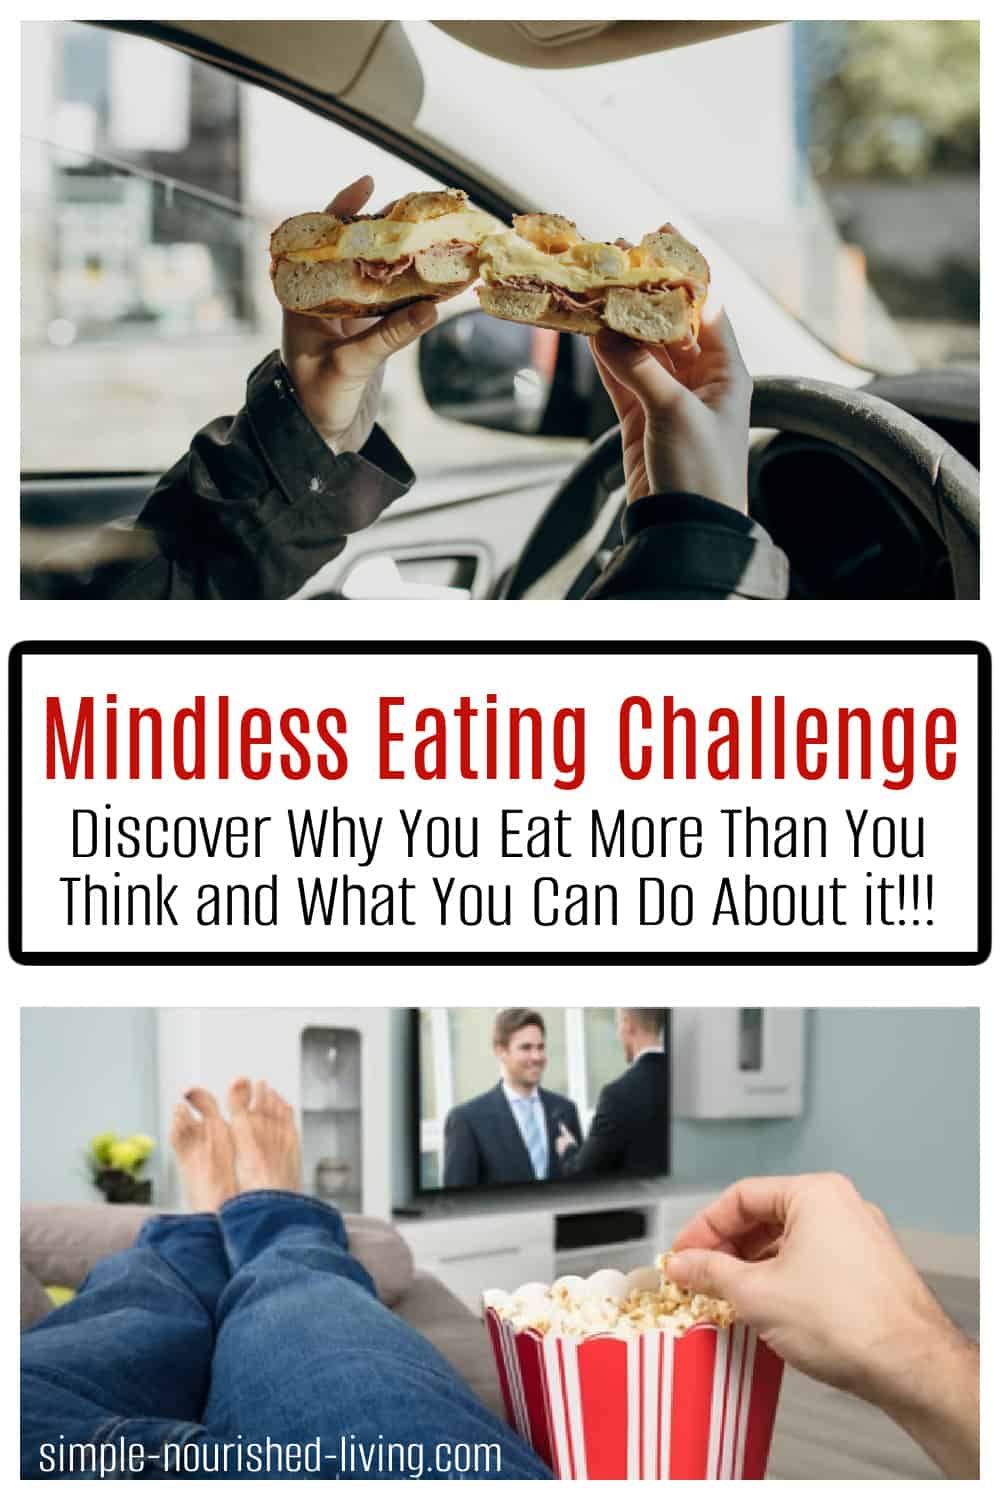 3 images: top photo driving while eating a bagel sandwich for breakfast, bottom photo person lying on sofa watching TV eating popcorn with text between: Mindless Eating Challenge: Find out why you eat more than you think and what you can do about it.